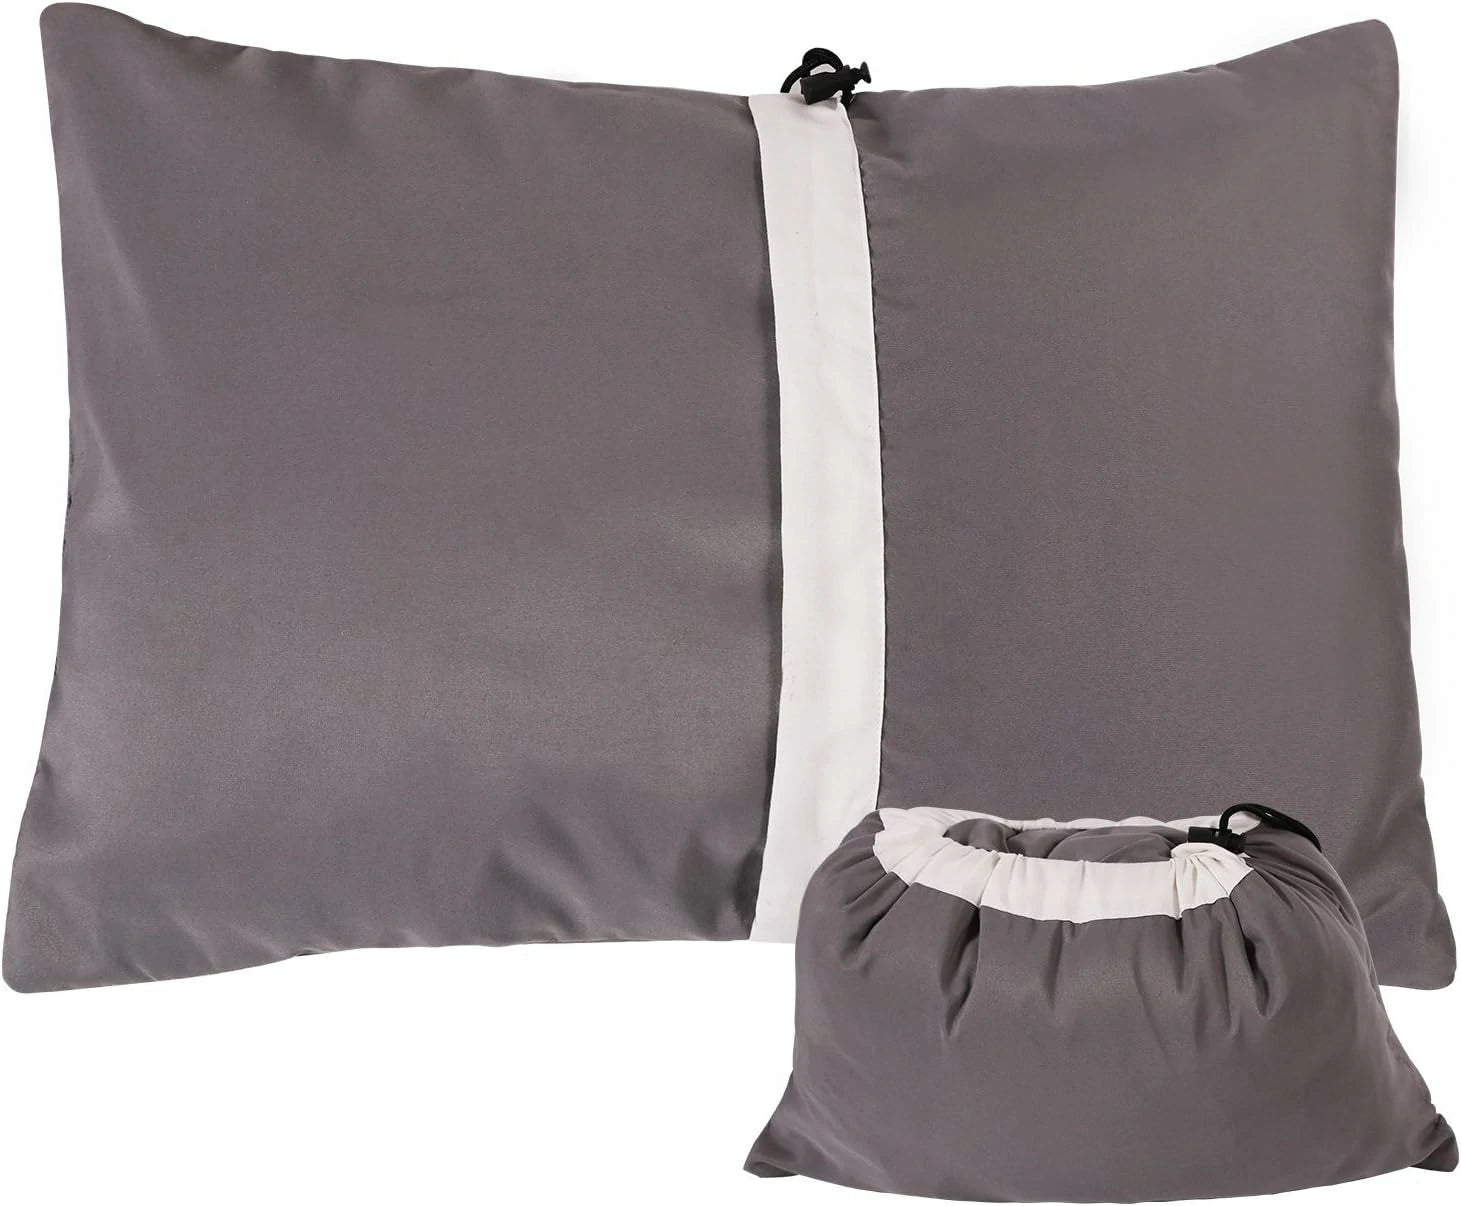 REDCAMP Camping Pillow for Sleeping Lightweight and Compressible